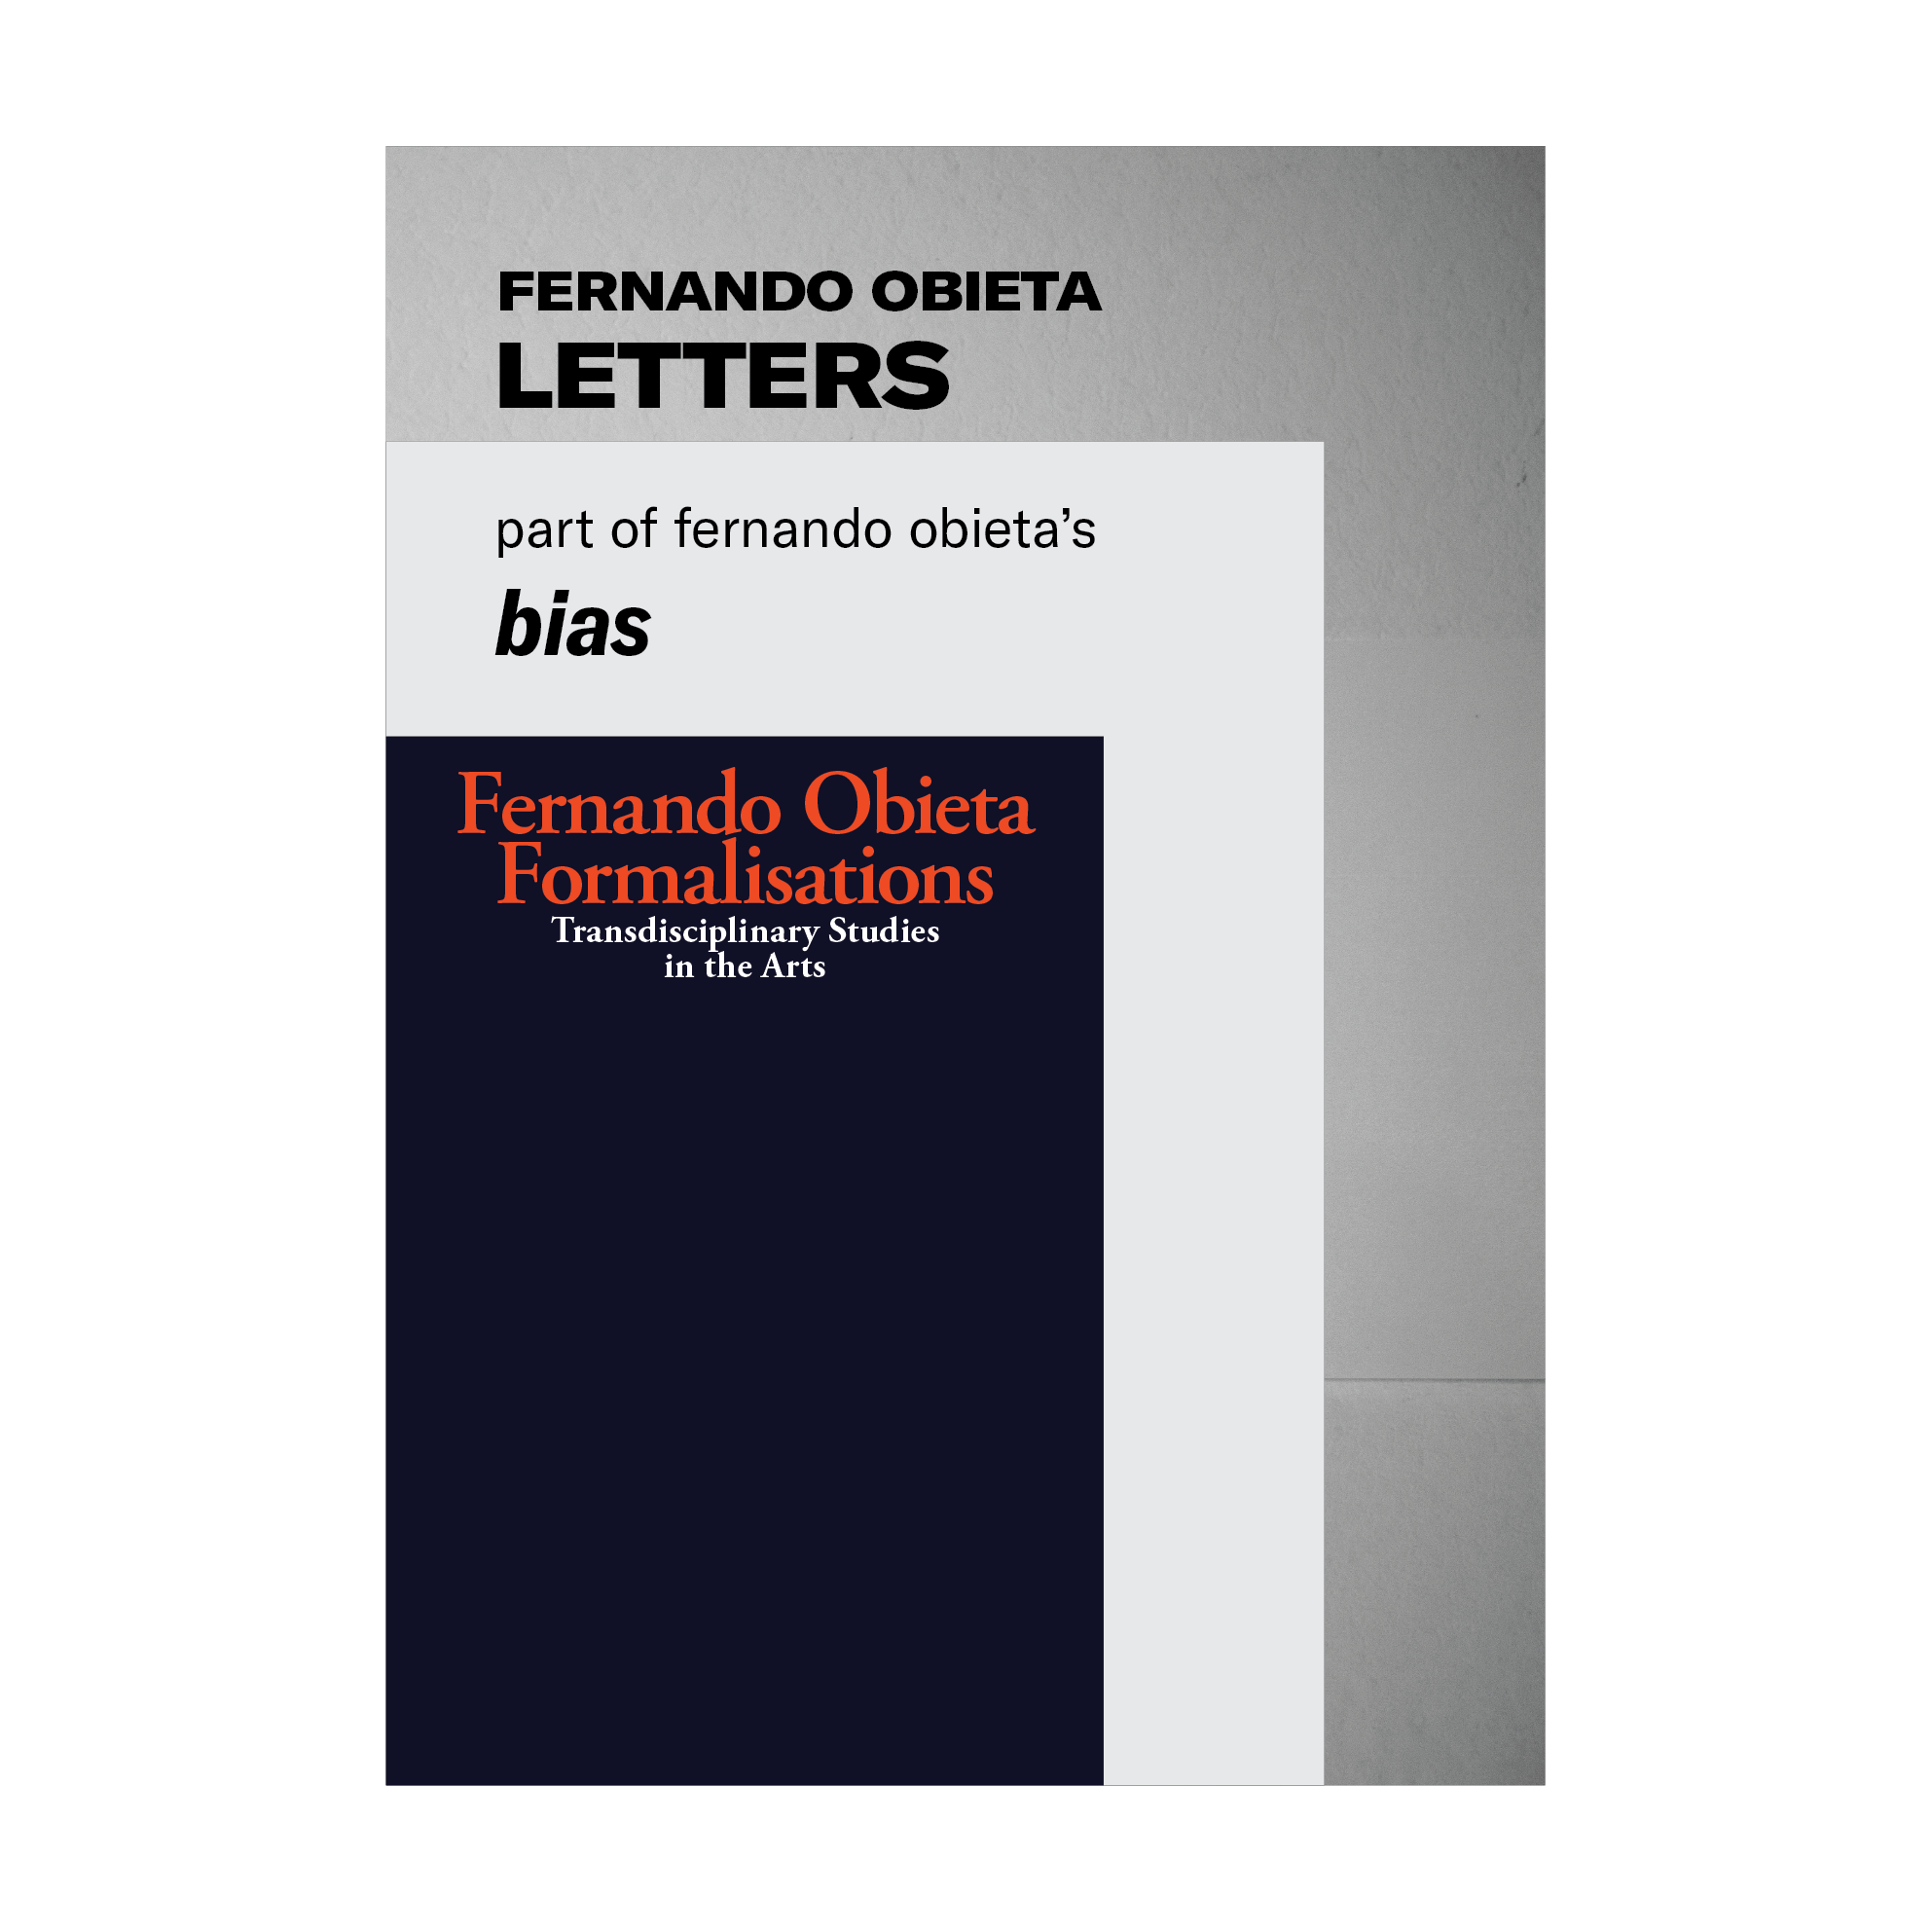 LETTERS to bias and Formalisations